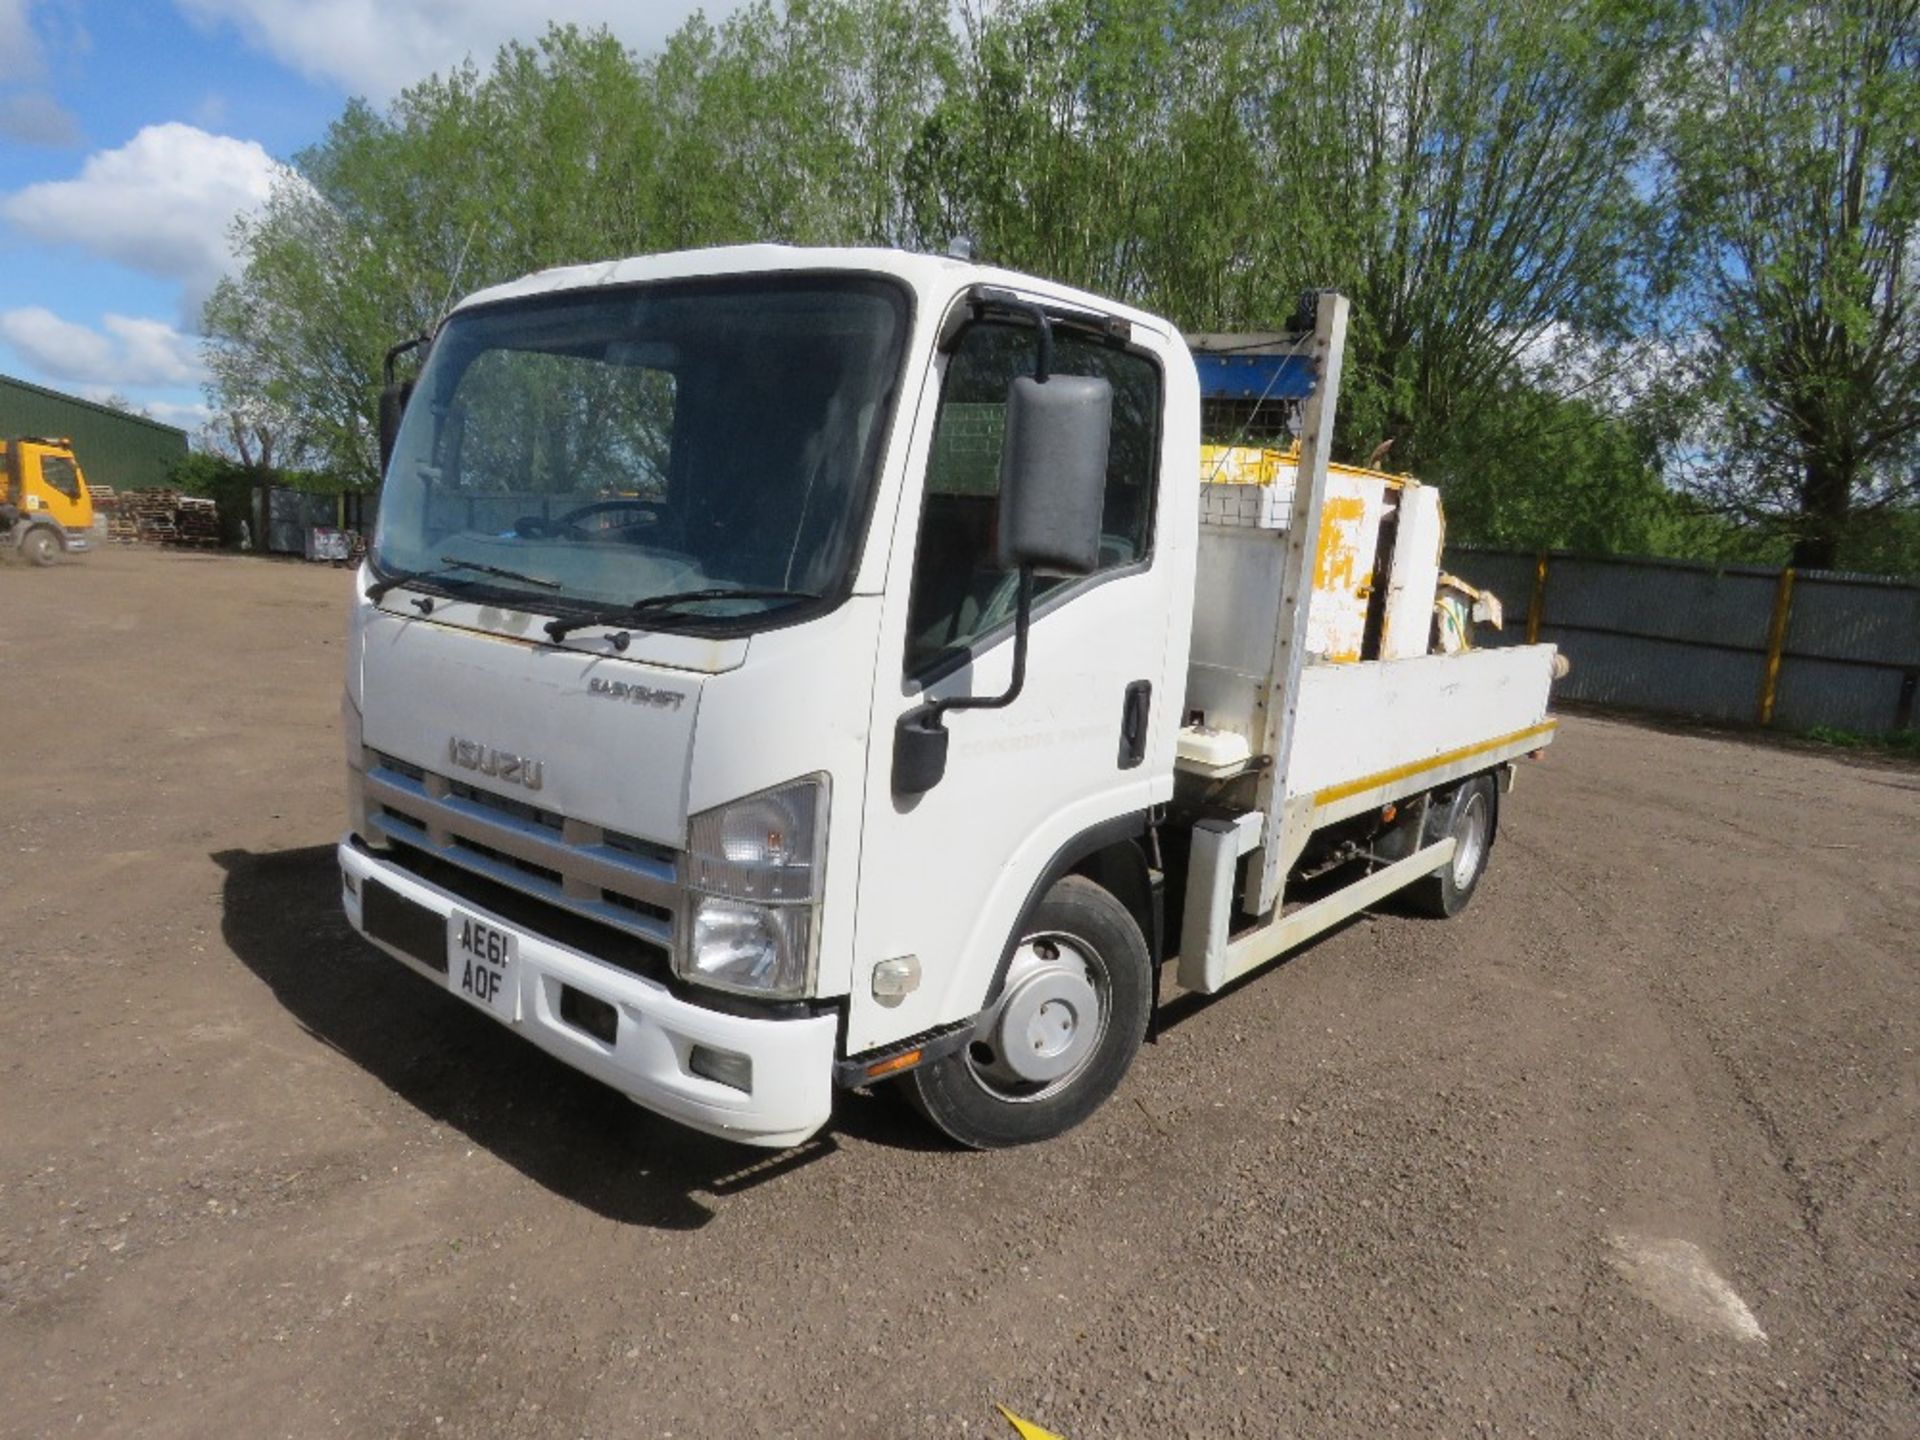 ISUZU CONCRETE PUMPING LORRY REG:AE61 AOF. EASYSHIFT GEARBOX. WITH V5. INCLUDES PIPES, CONNECTORS AN